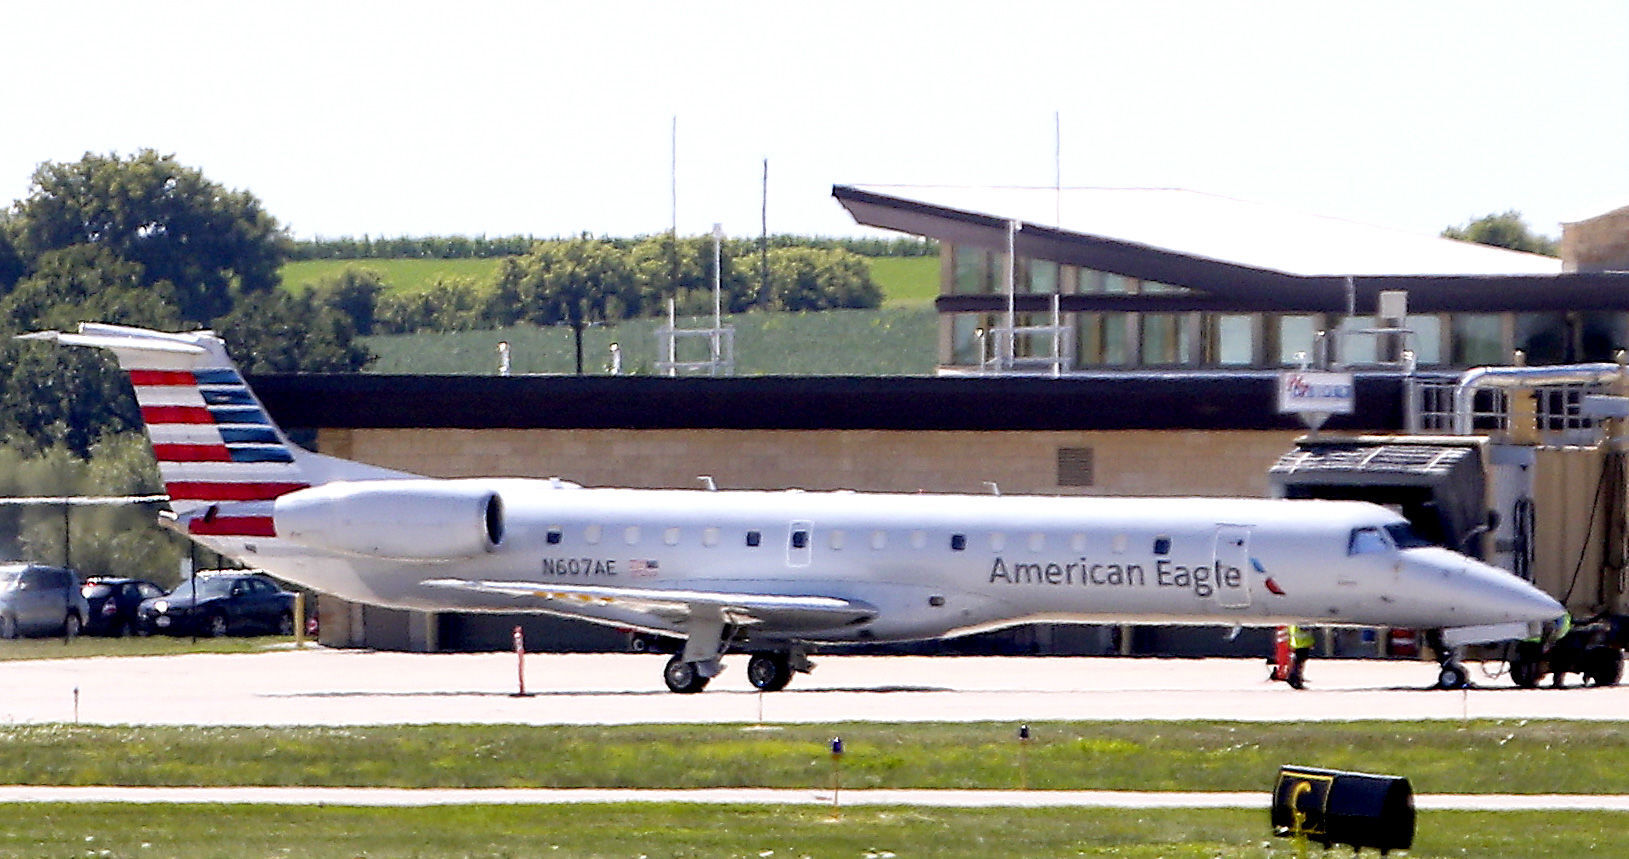 An American Eagle jet pulls up to the terminal at the Dubuque Regional Airport Thursday, Aug. 20, 2020. PHOTO CREDIT: Dave Kettering